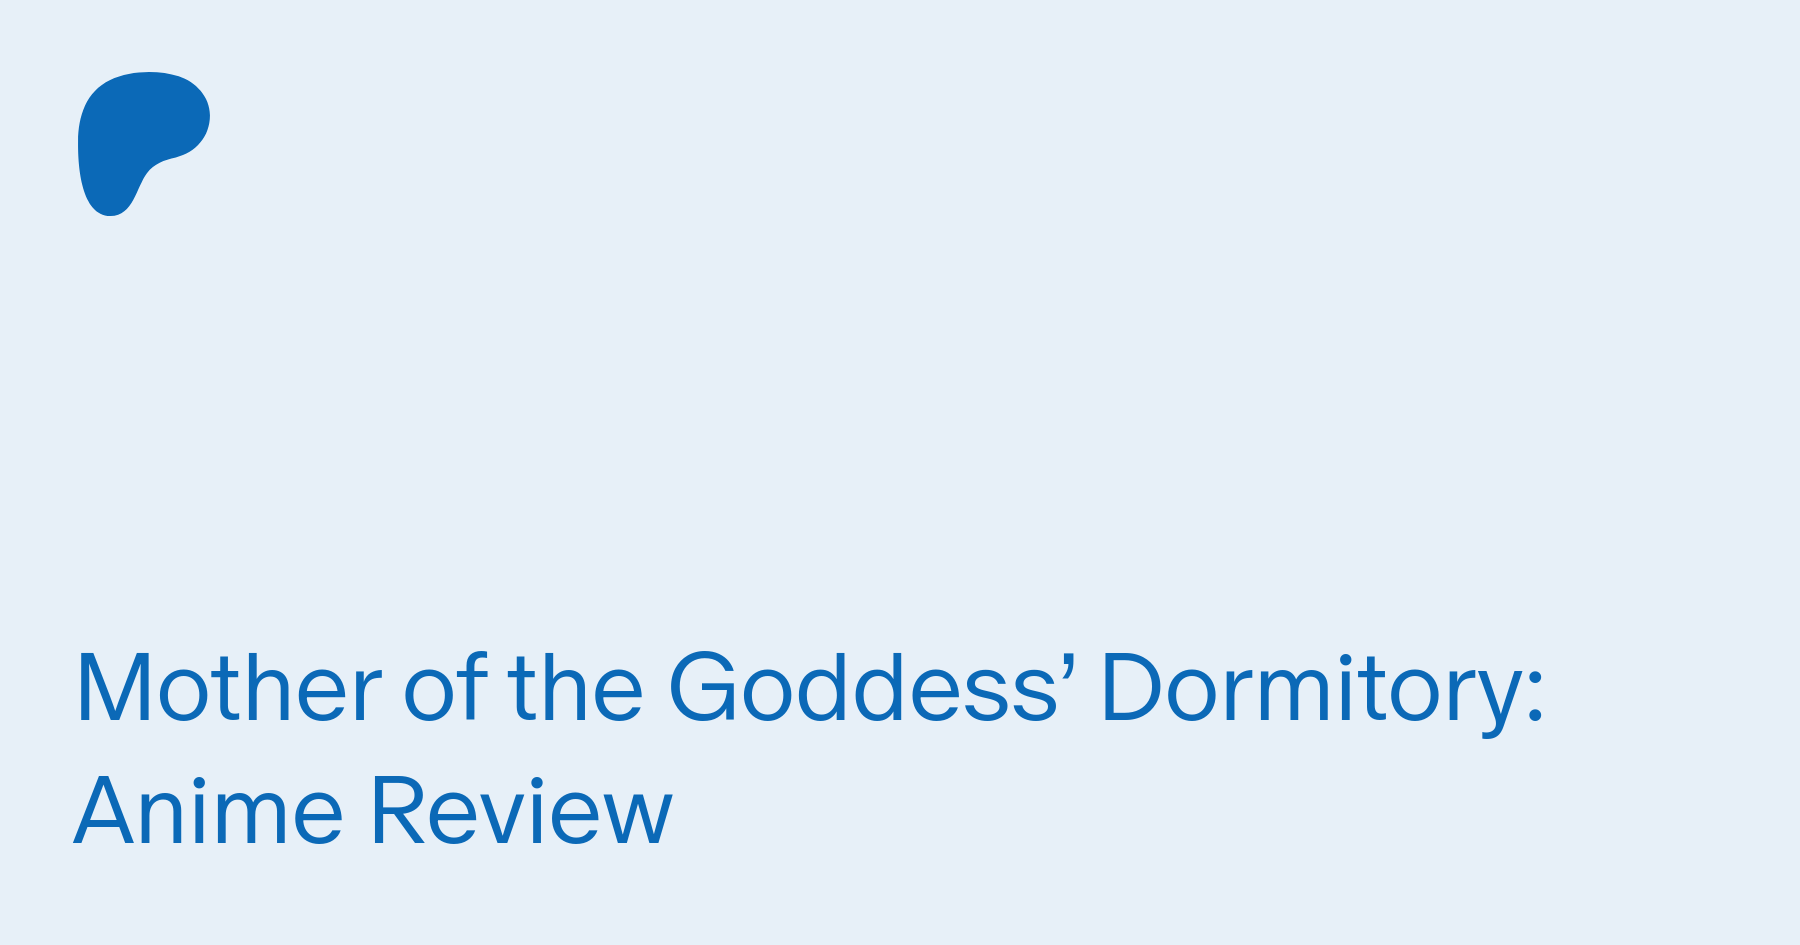 Mother of the Goddess' Dormitory Review